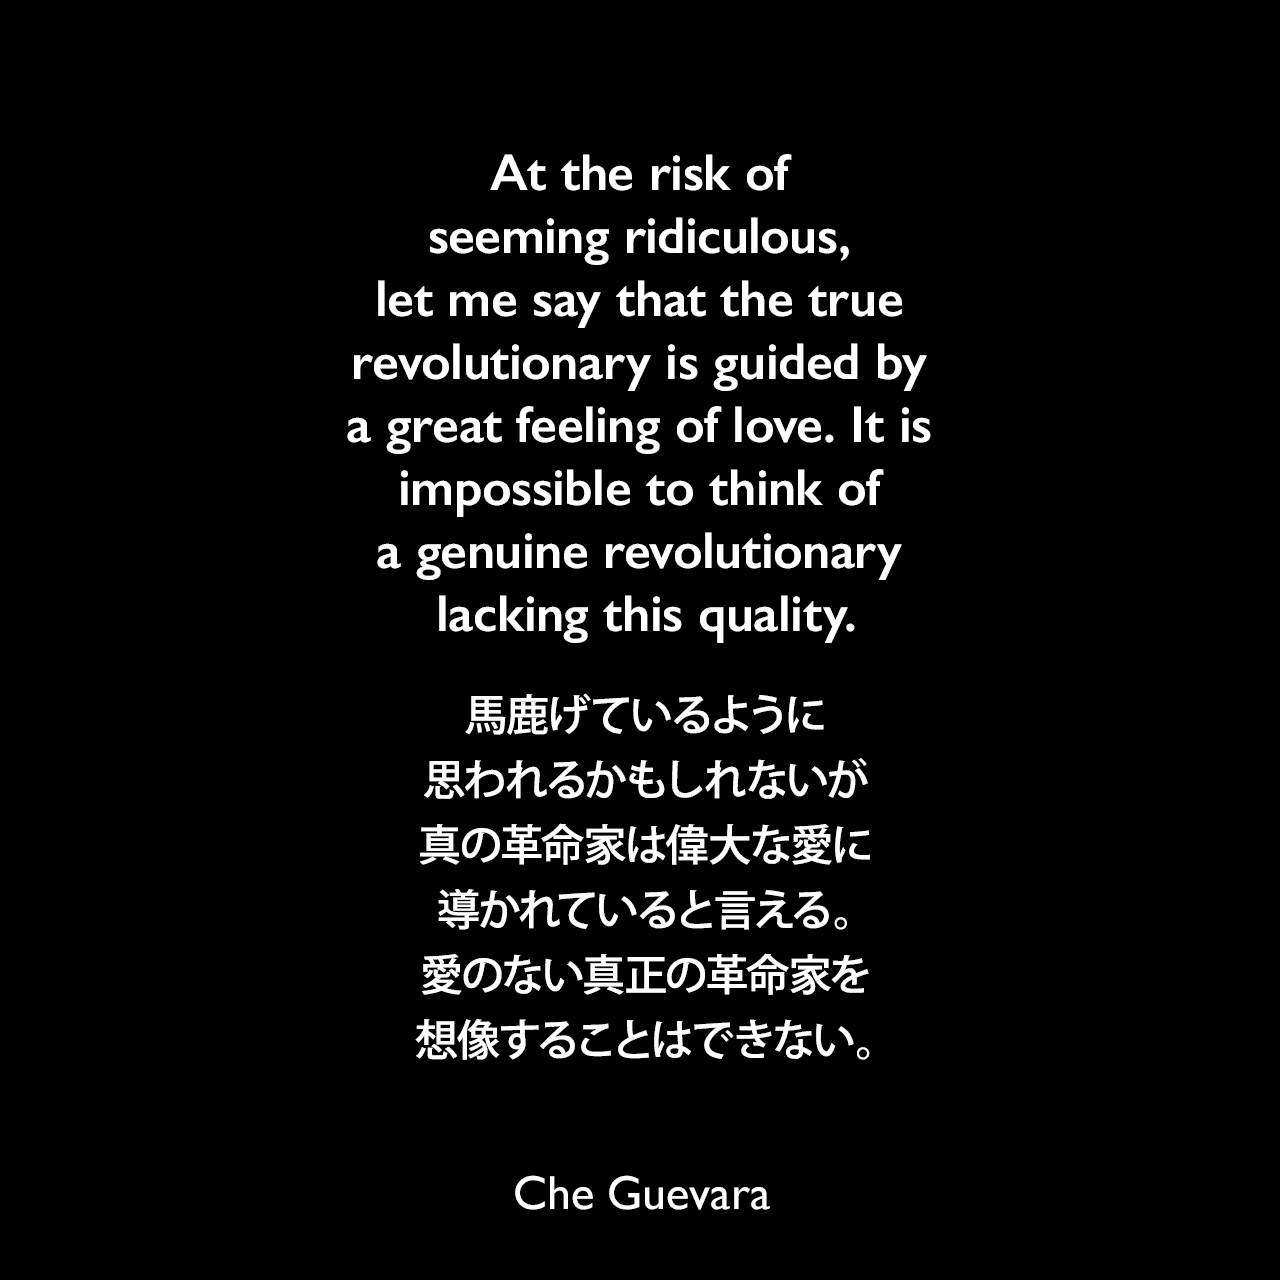 At the risk of seeming ridiculous, let me say that the true revolutionary is guided by a great feeling of love. It is impossible to think of a genuine revolutionary lacking this quality.馬鹿げているように思われるかもしれないが、真の革命家は偉大な愛に導かれていると言える。愛のない真正の革命家を想像することはできない。Che Guevara